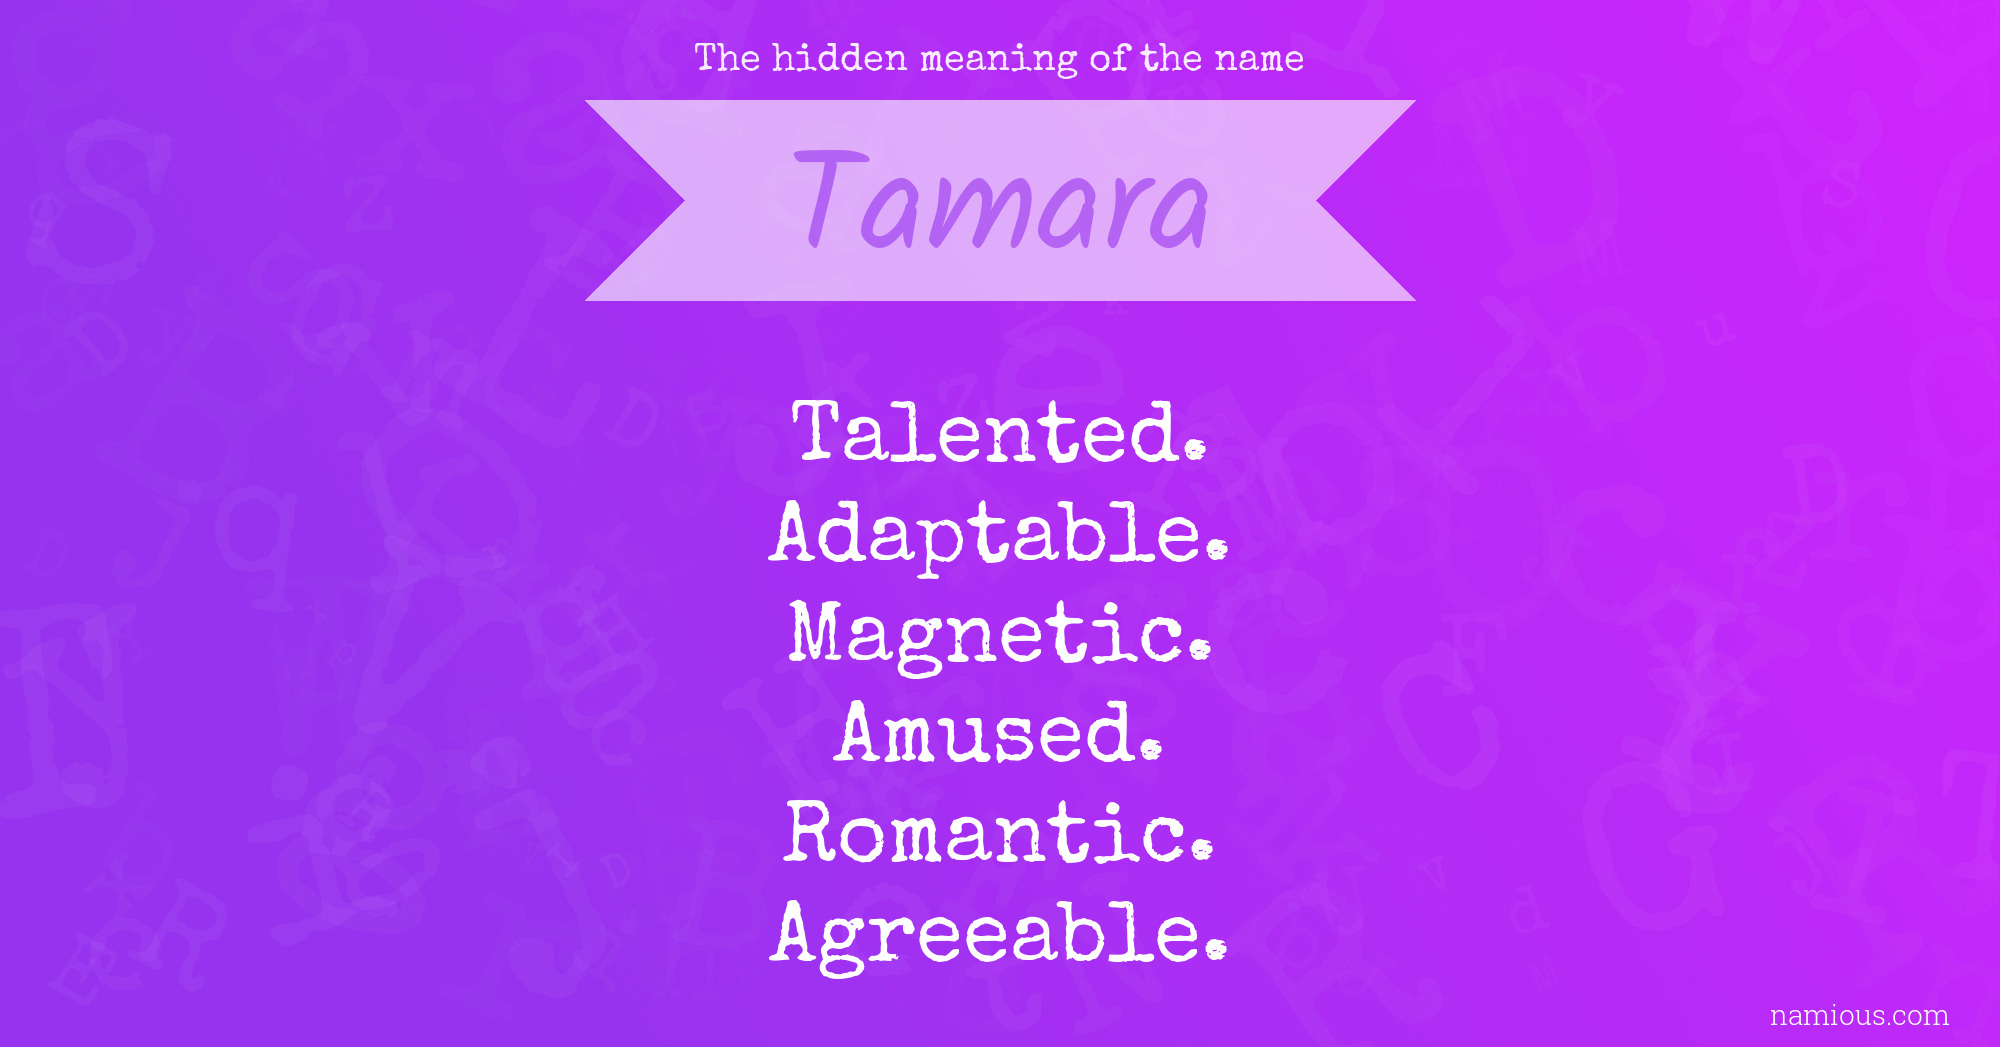 The hidden meaning of the name Tamara